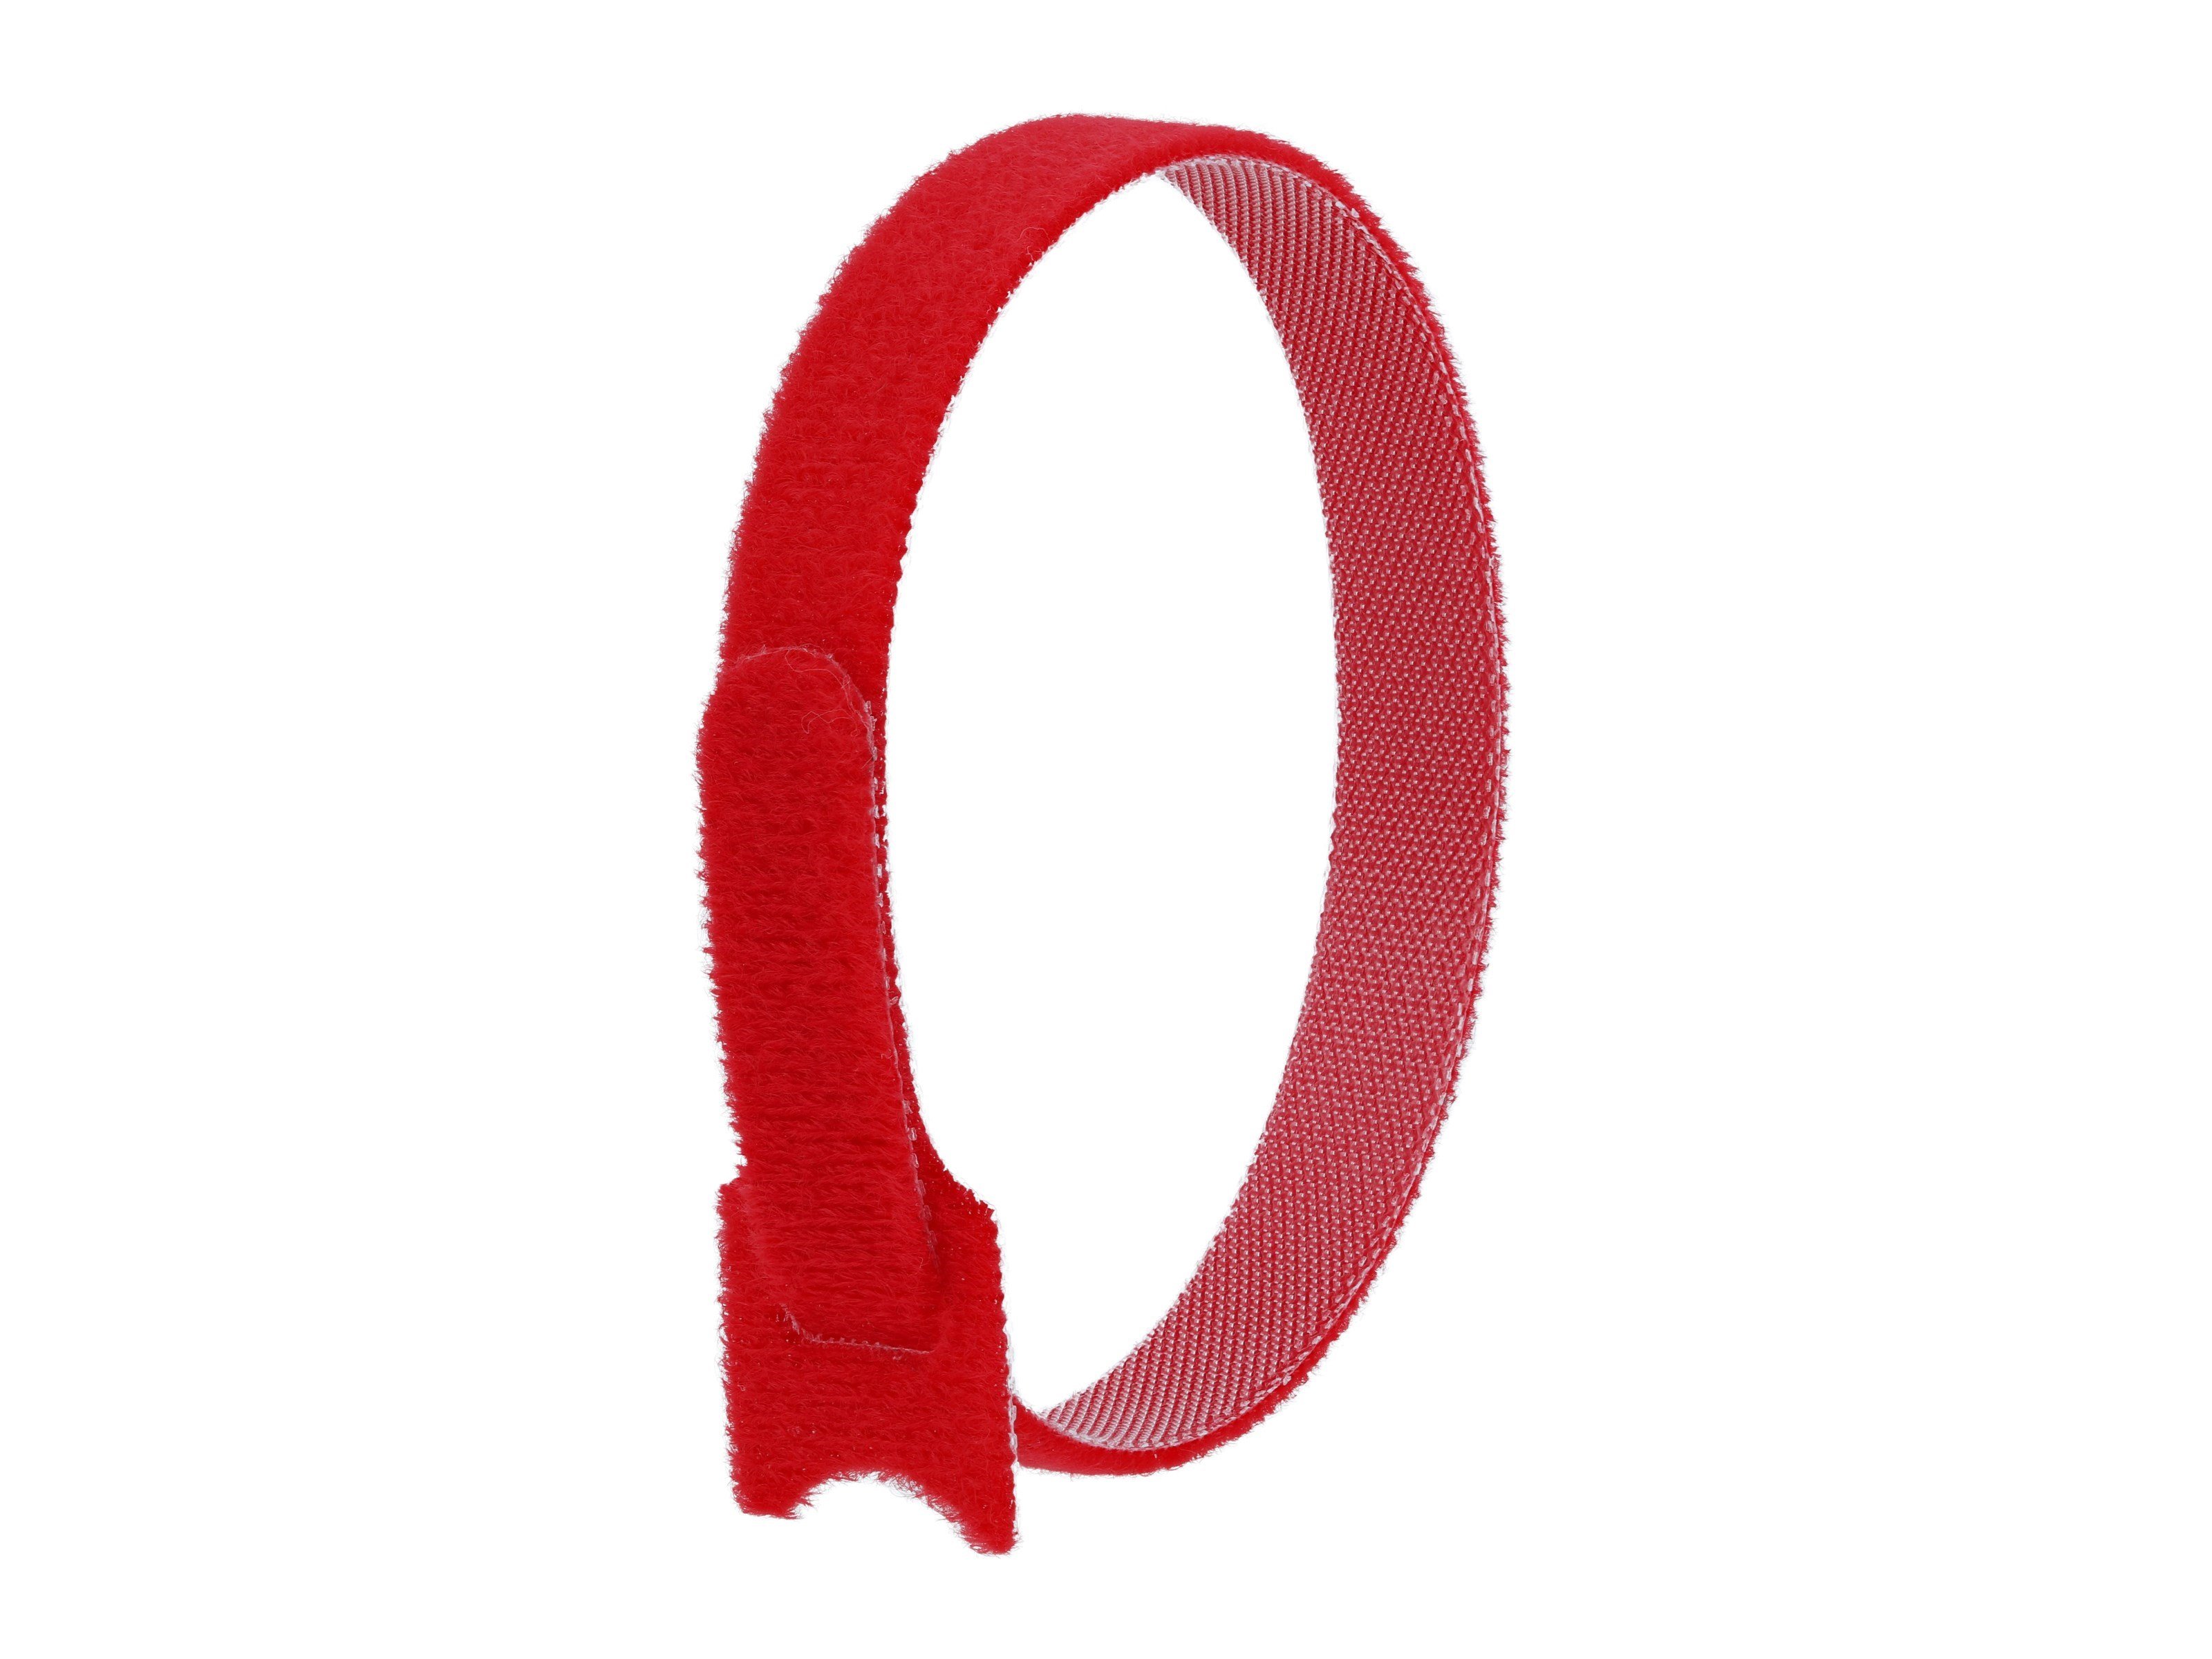 Unique Bargains Reusable Cable Ties Hook and Loop Cord Strap 5.5 Yard x 0.8 inch Black 1 Roll - Red